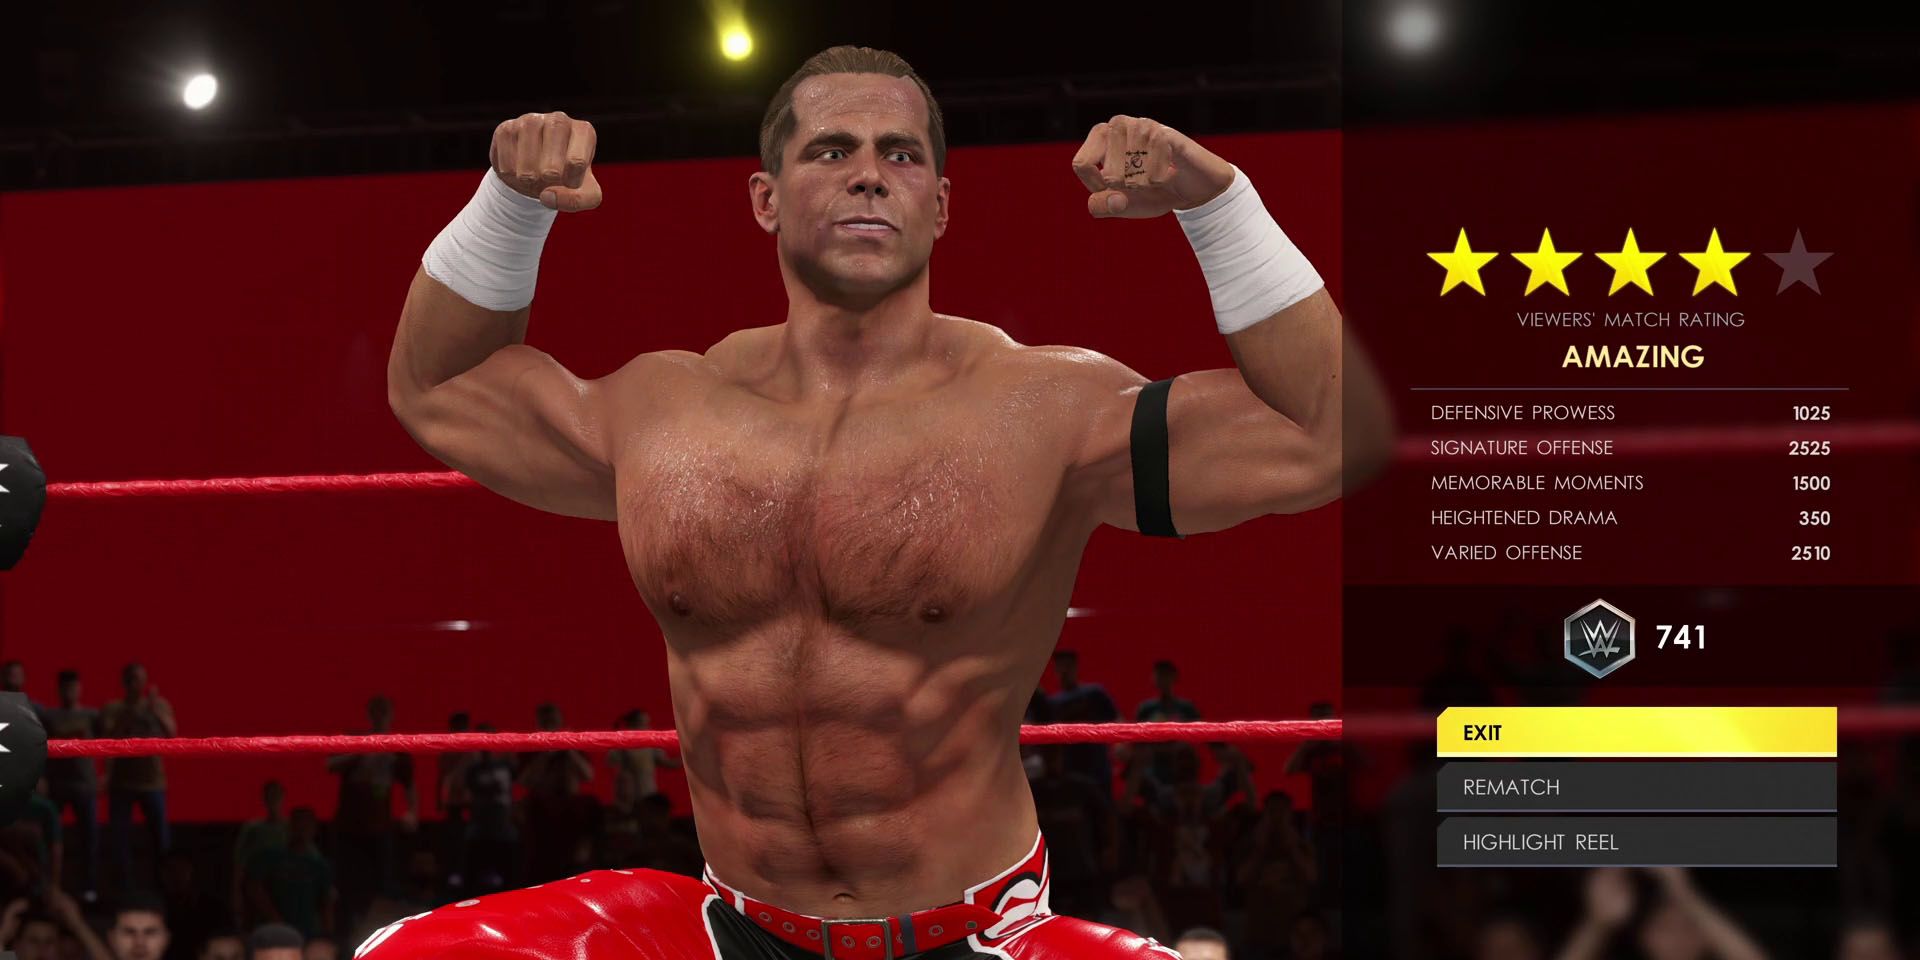 wwe-2k22-how-to-change-difficulty-with-sliders-03-match-points-higher-on-legend